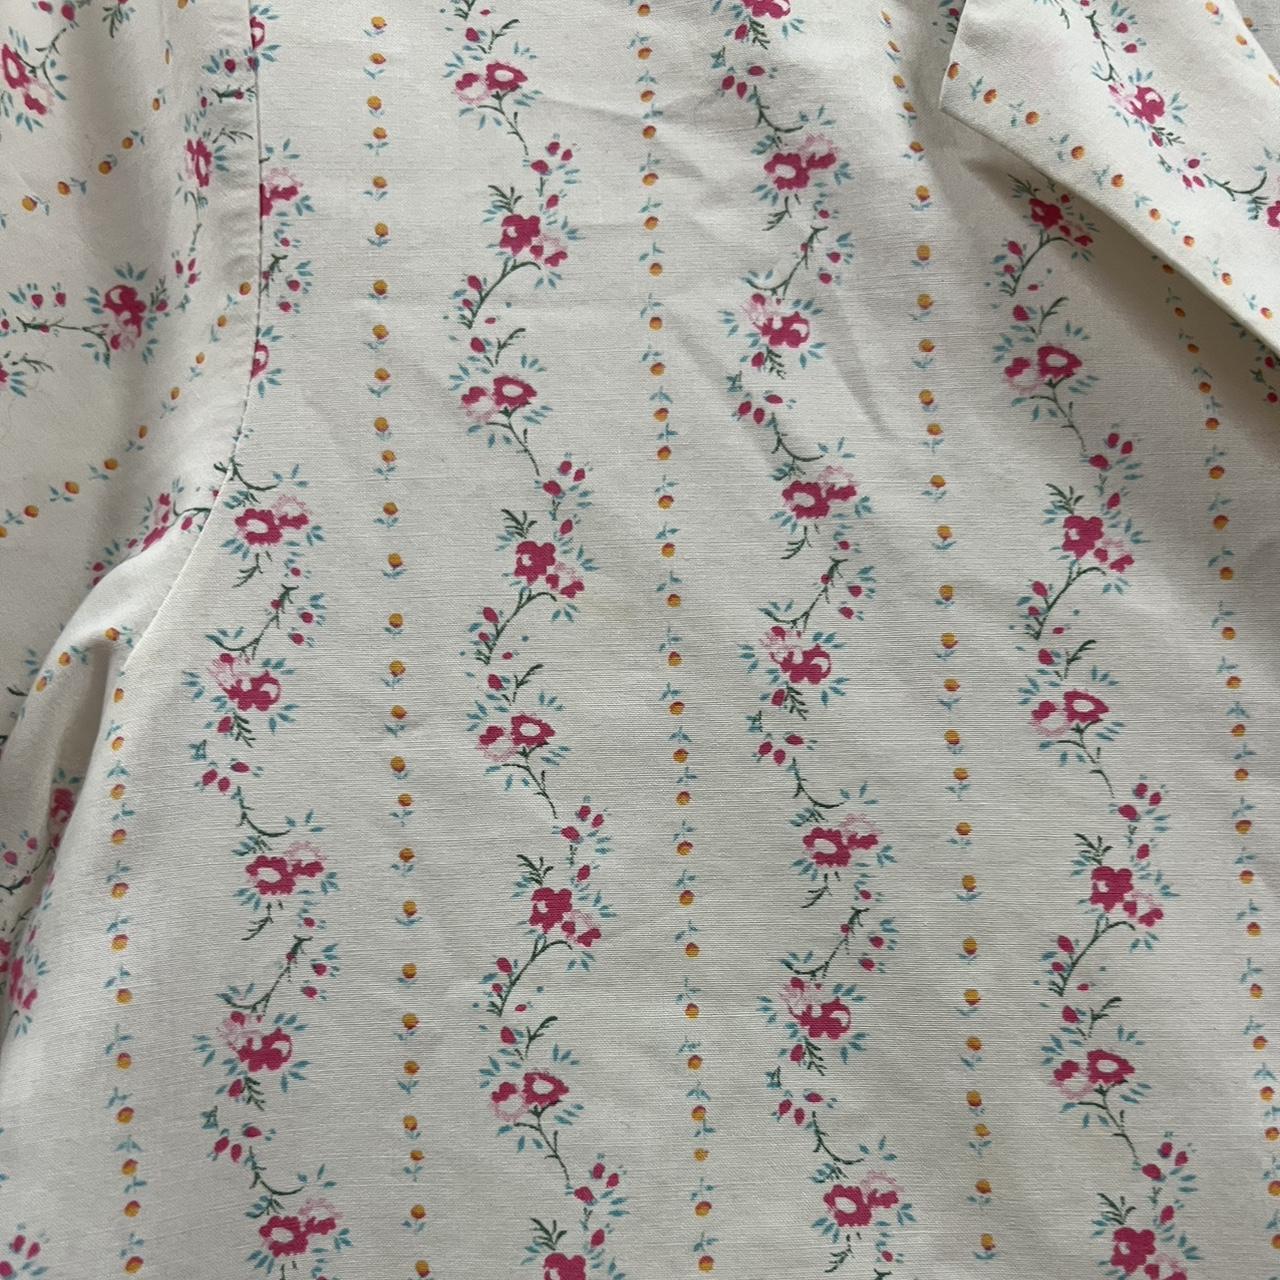 Sears Women's White and Pink Blouse (4)